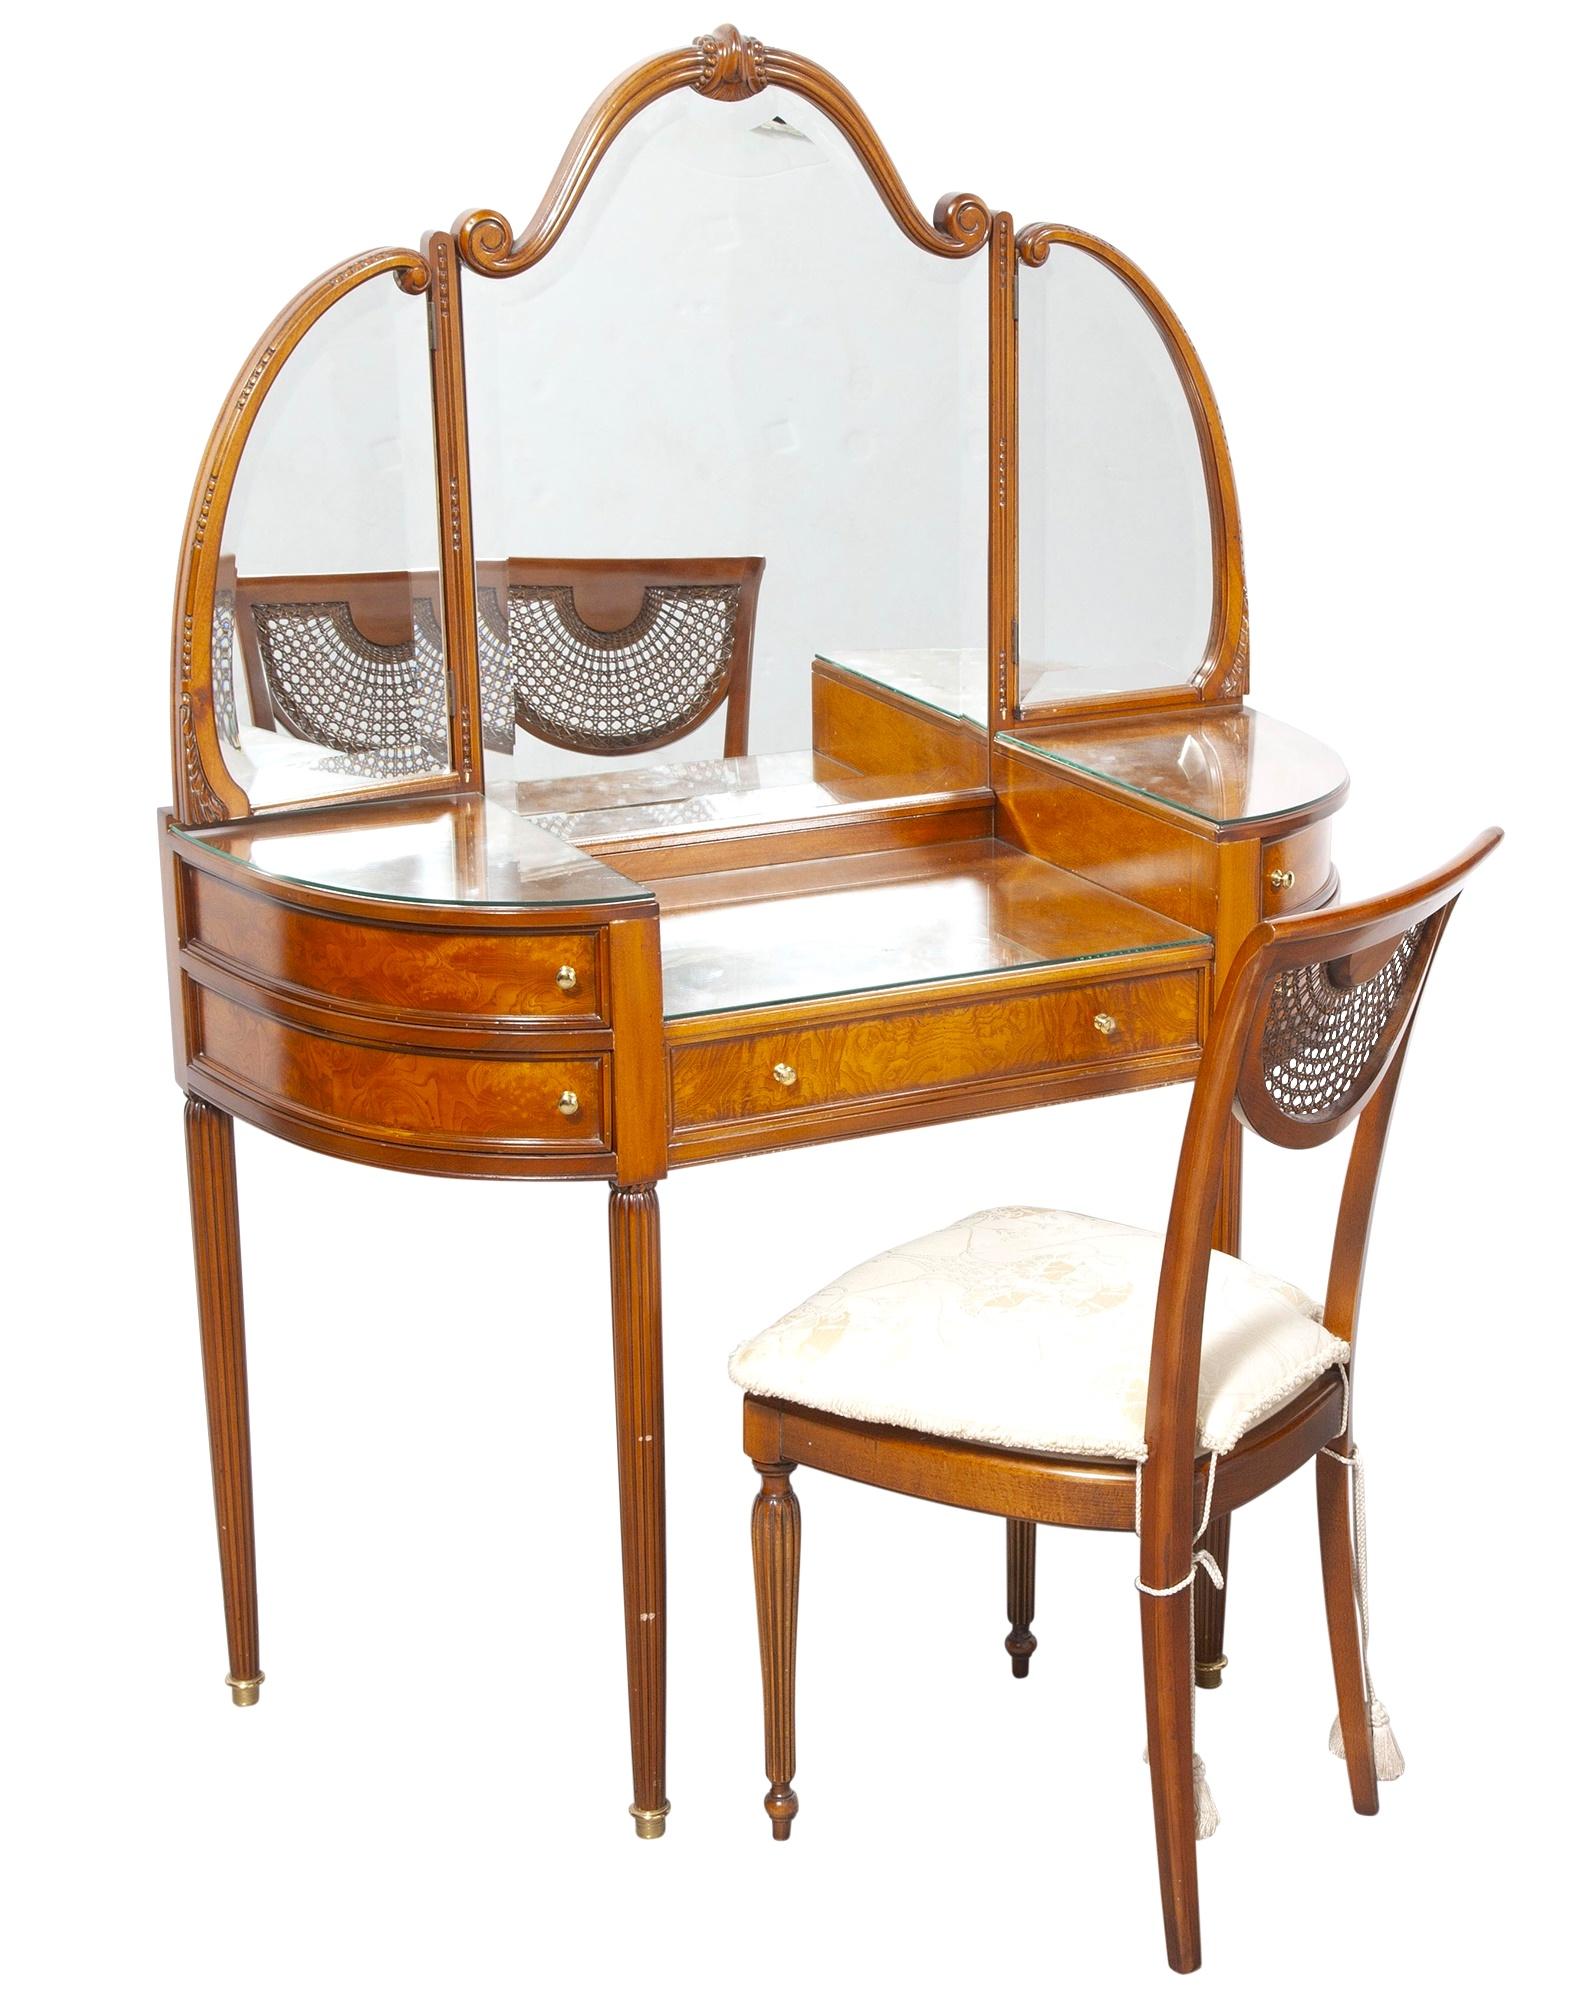 Italian Edwardian Style Walnut Vanity Dressing Table With Chair For Sale 6